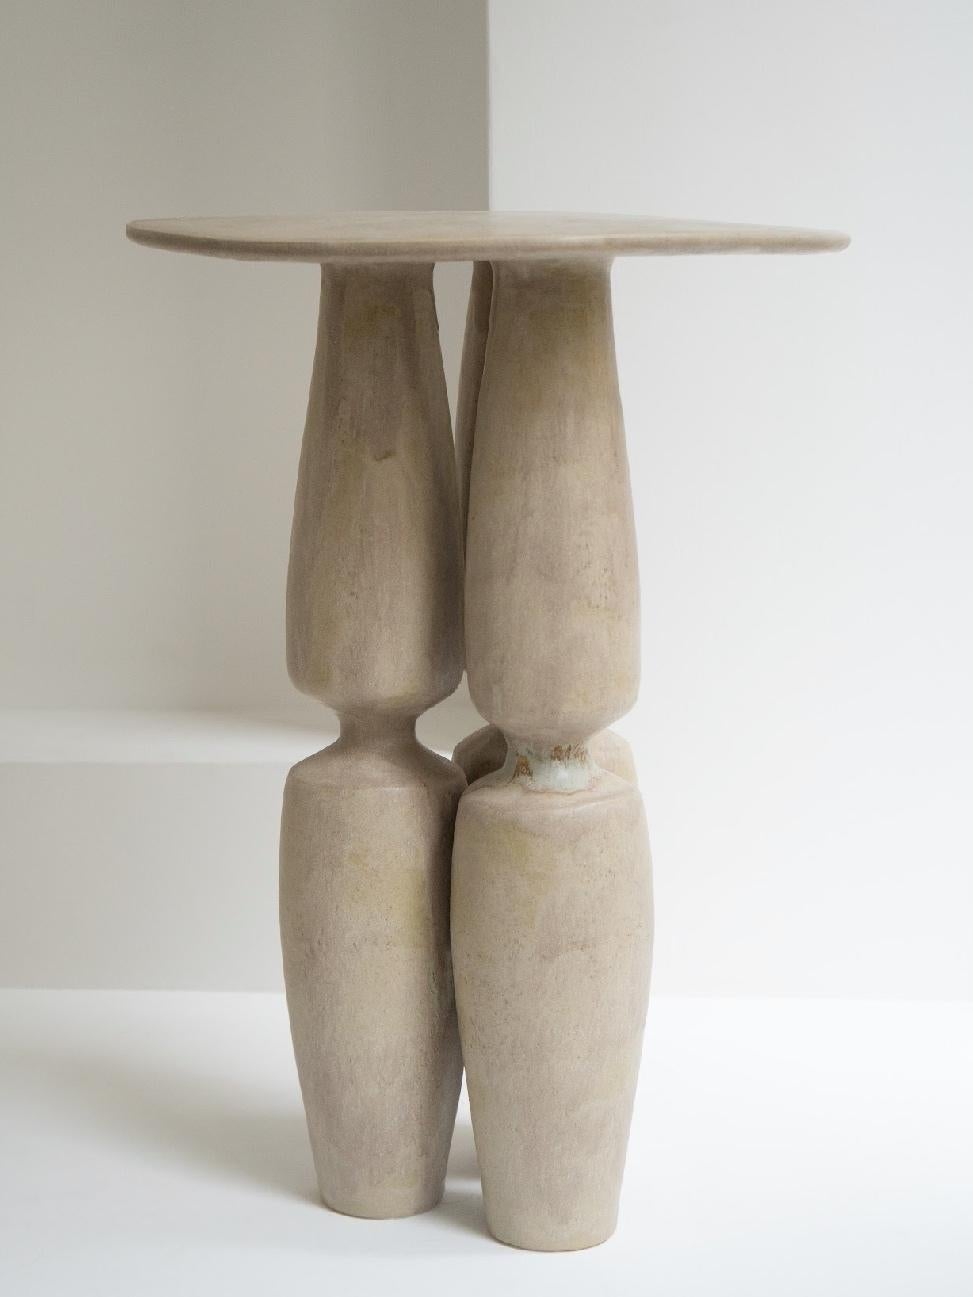 Stoneware Side Table by Sophie Vaidie
One Of A Kind.
Dimensions: Ø 44 x H 62 cm. 
Materials: Beige stoneware with beige glaze.

In the beginning, there was a need to make, with the hands, the touch, the senses. Then came the desire to create and